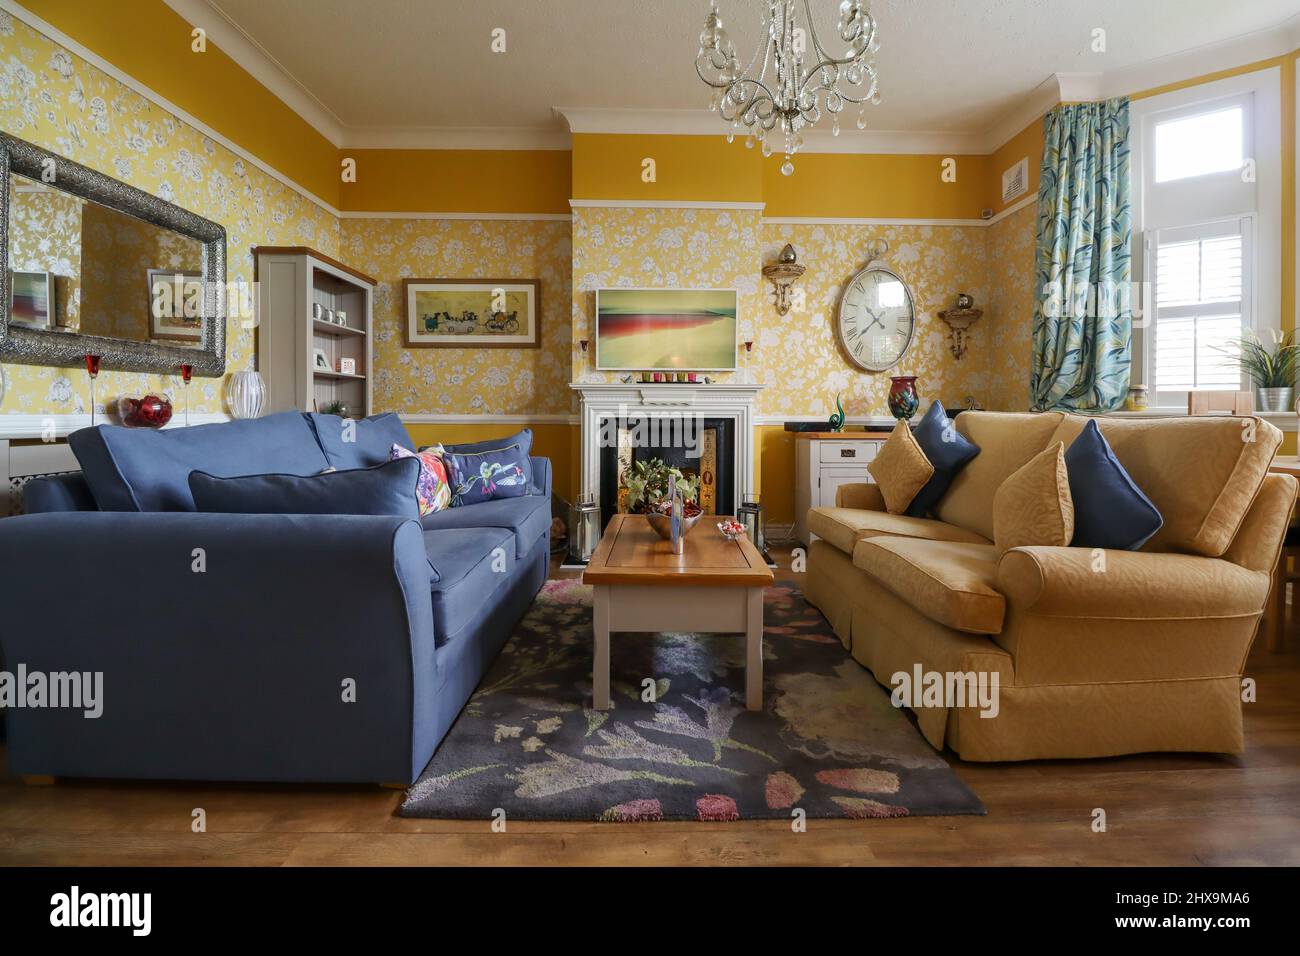 A classically decorated navy blue and yellow ochre living room / lounge Stock Photo